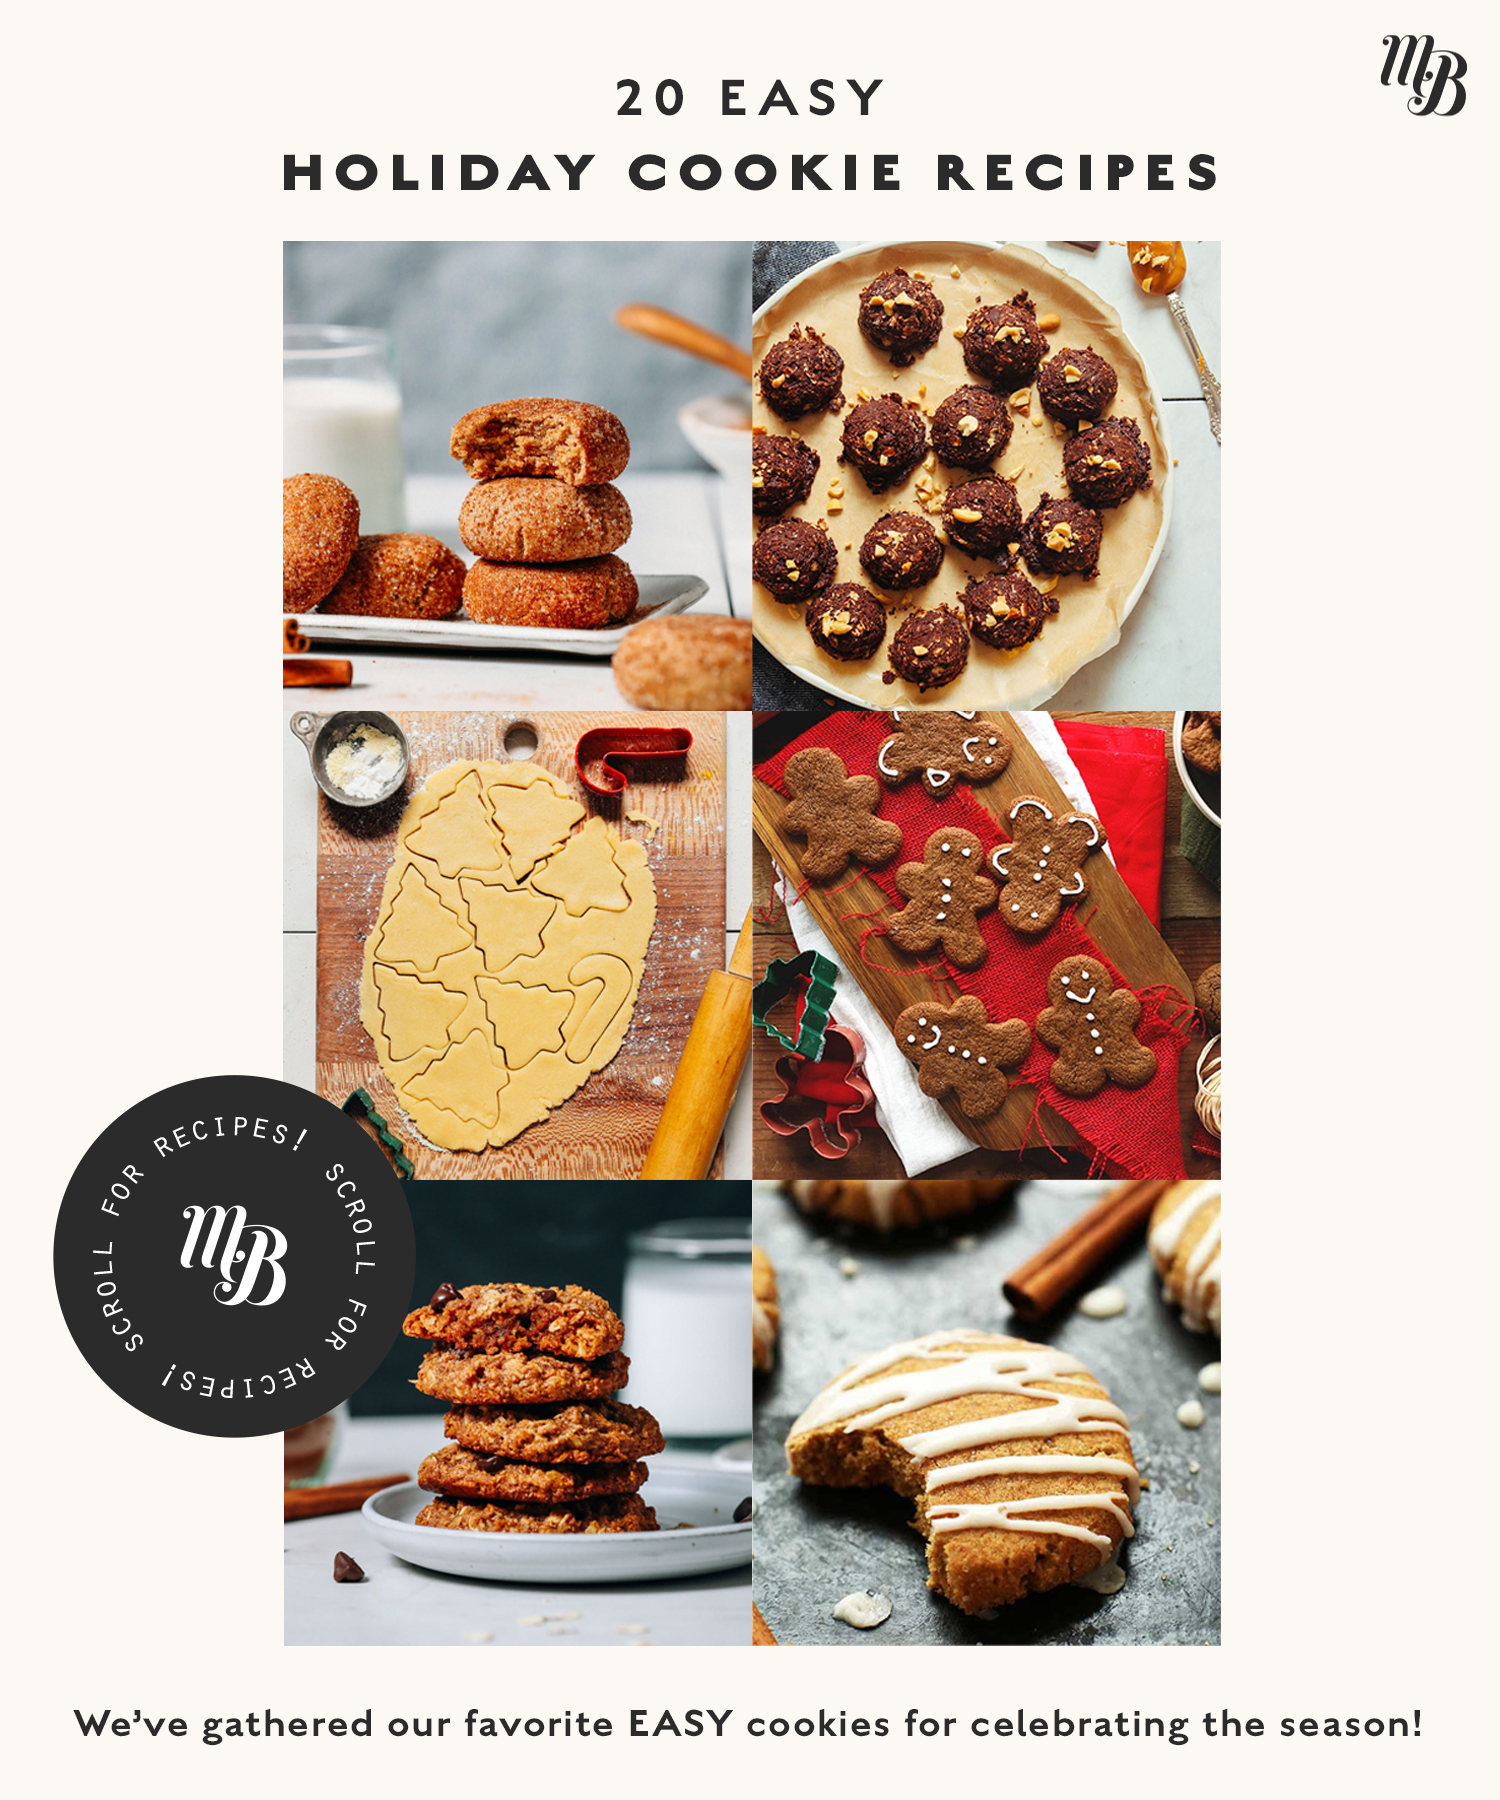 Assortment of easy holiday cookie recipes